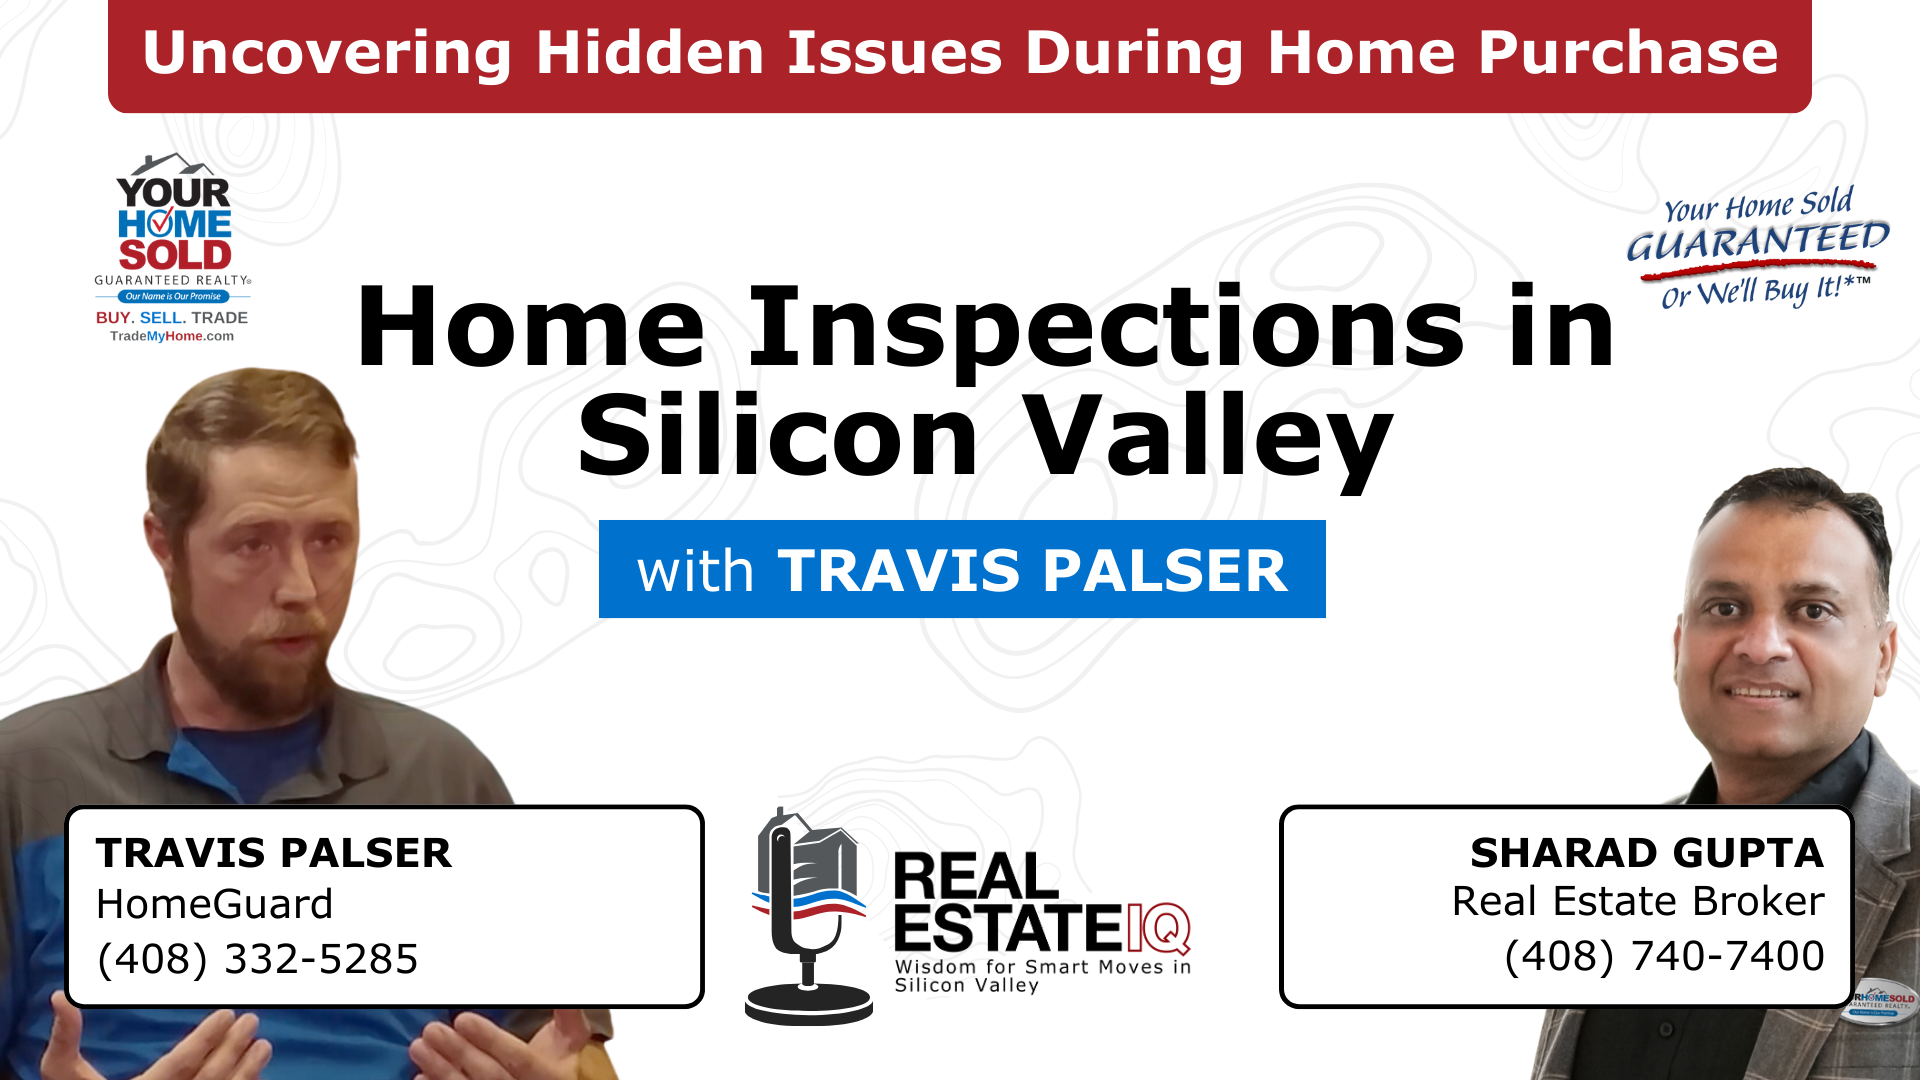 Home Inspections: Uncovering Hidden Issues During Home Purchase in Silicon Valley Video